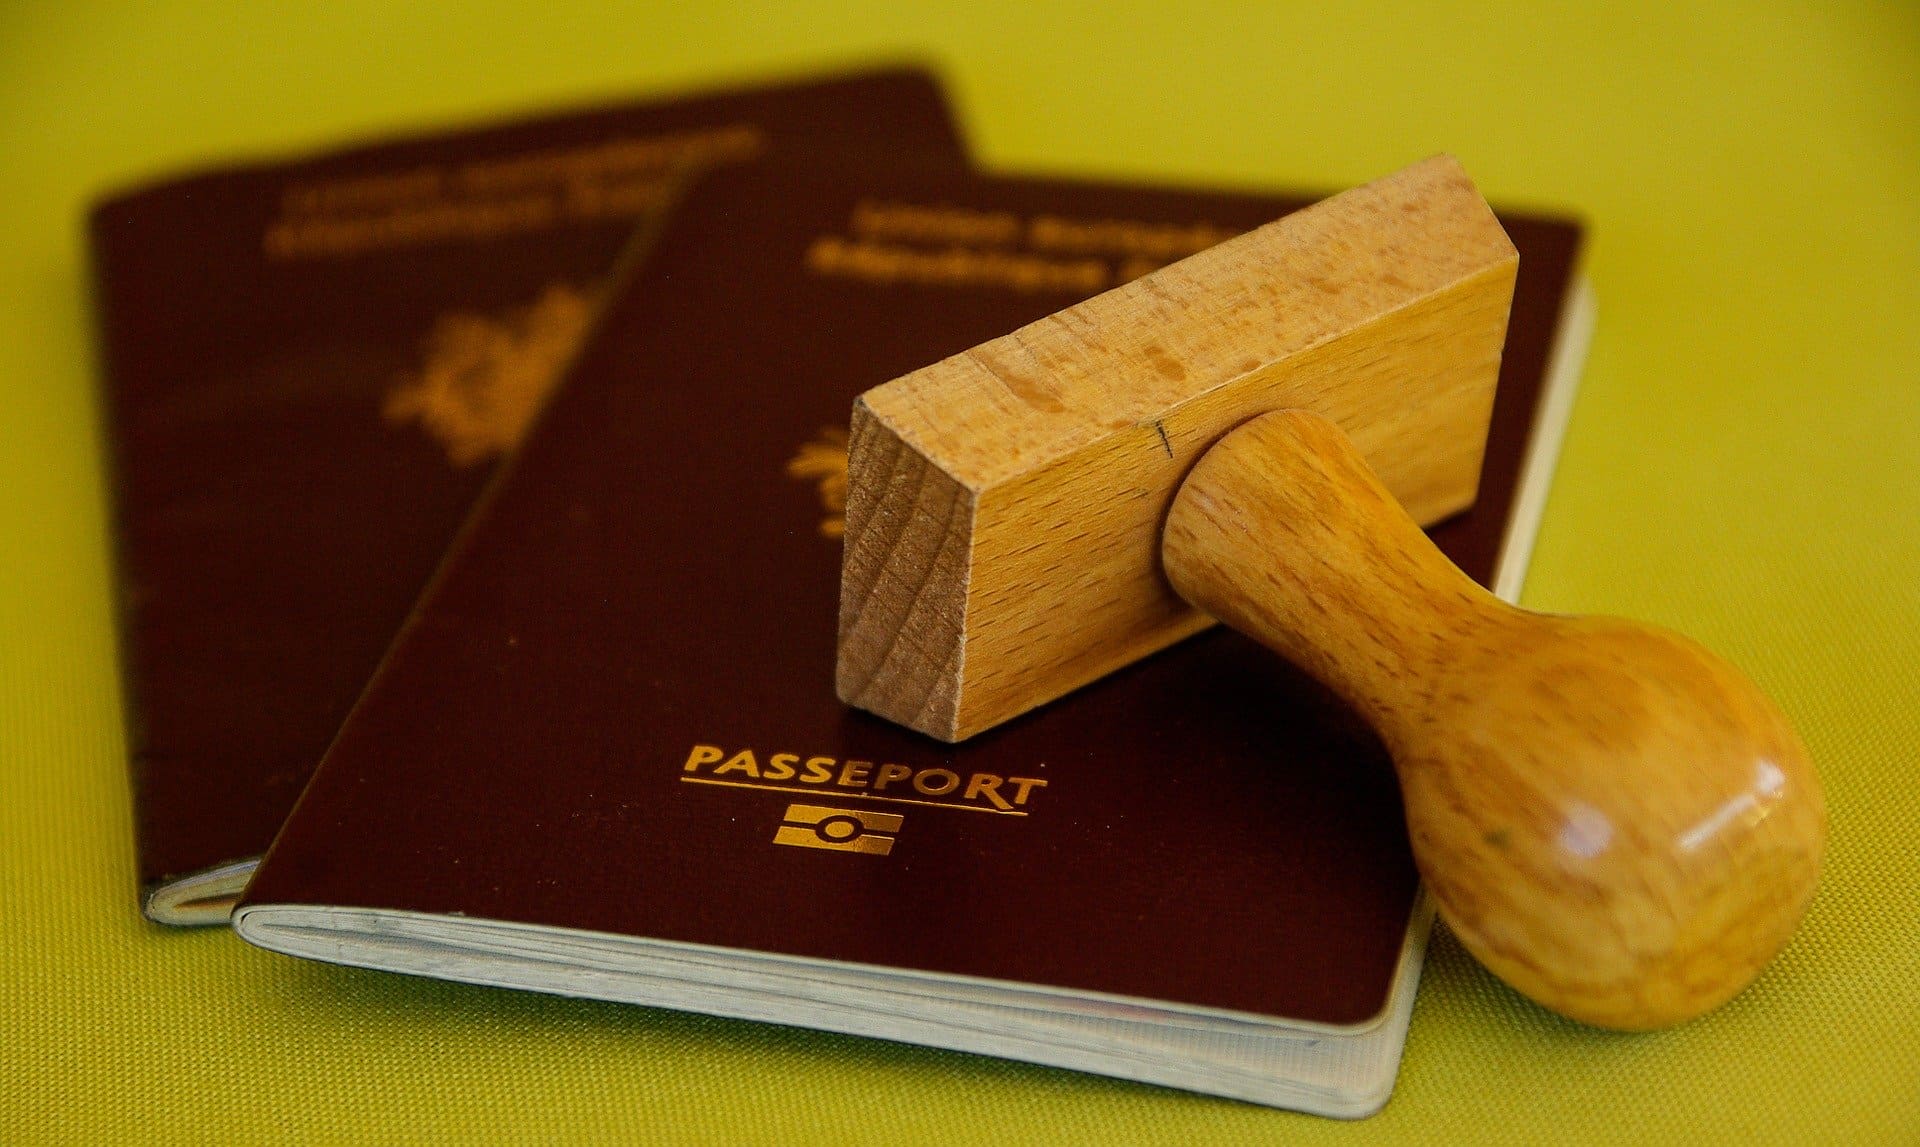 Passport and stamp Reader's Warning: theft in Spain